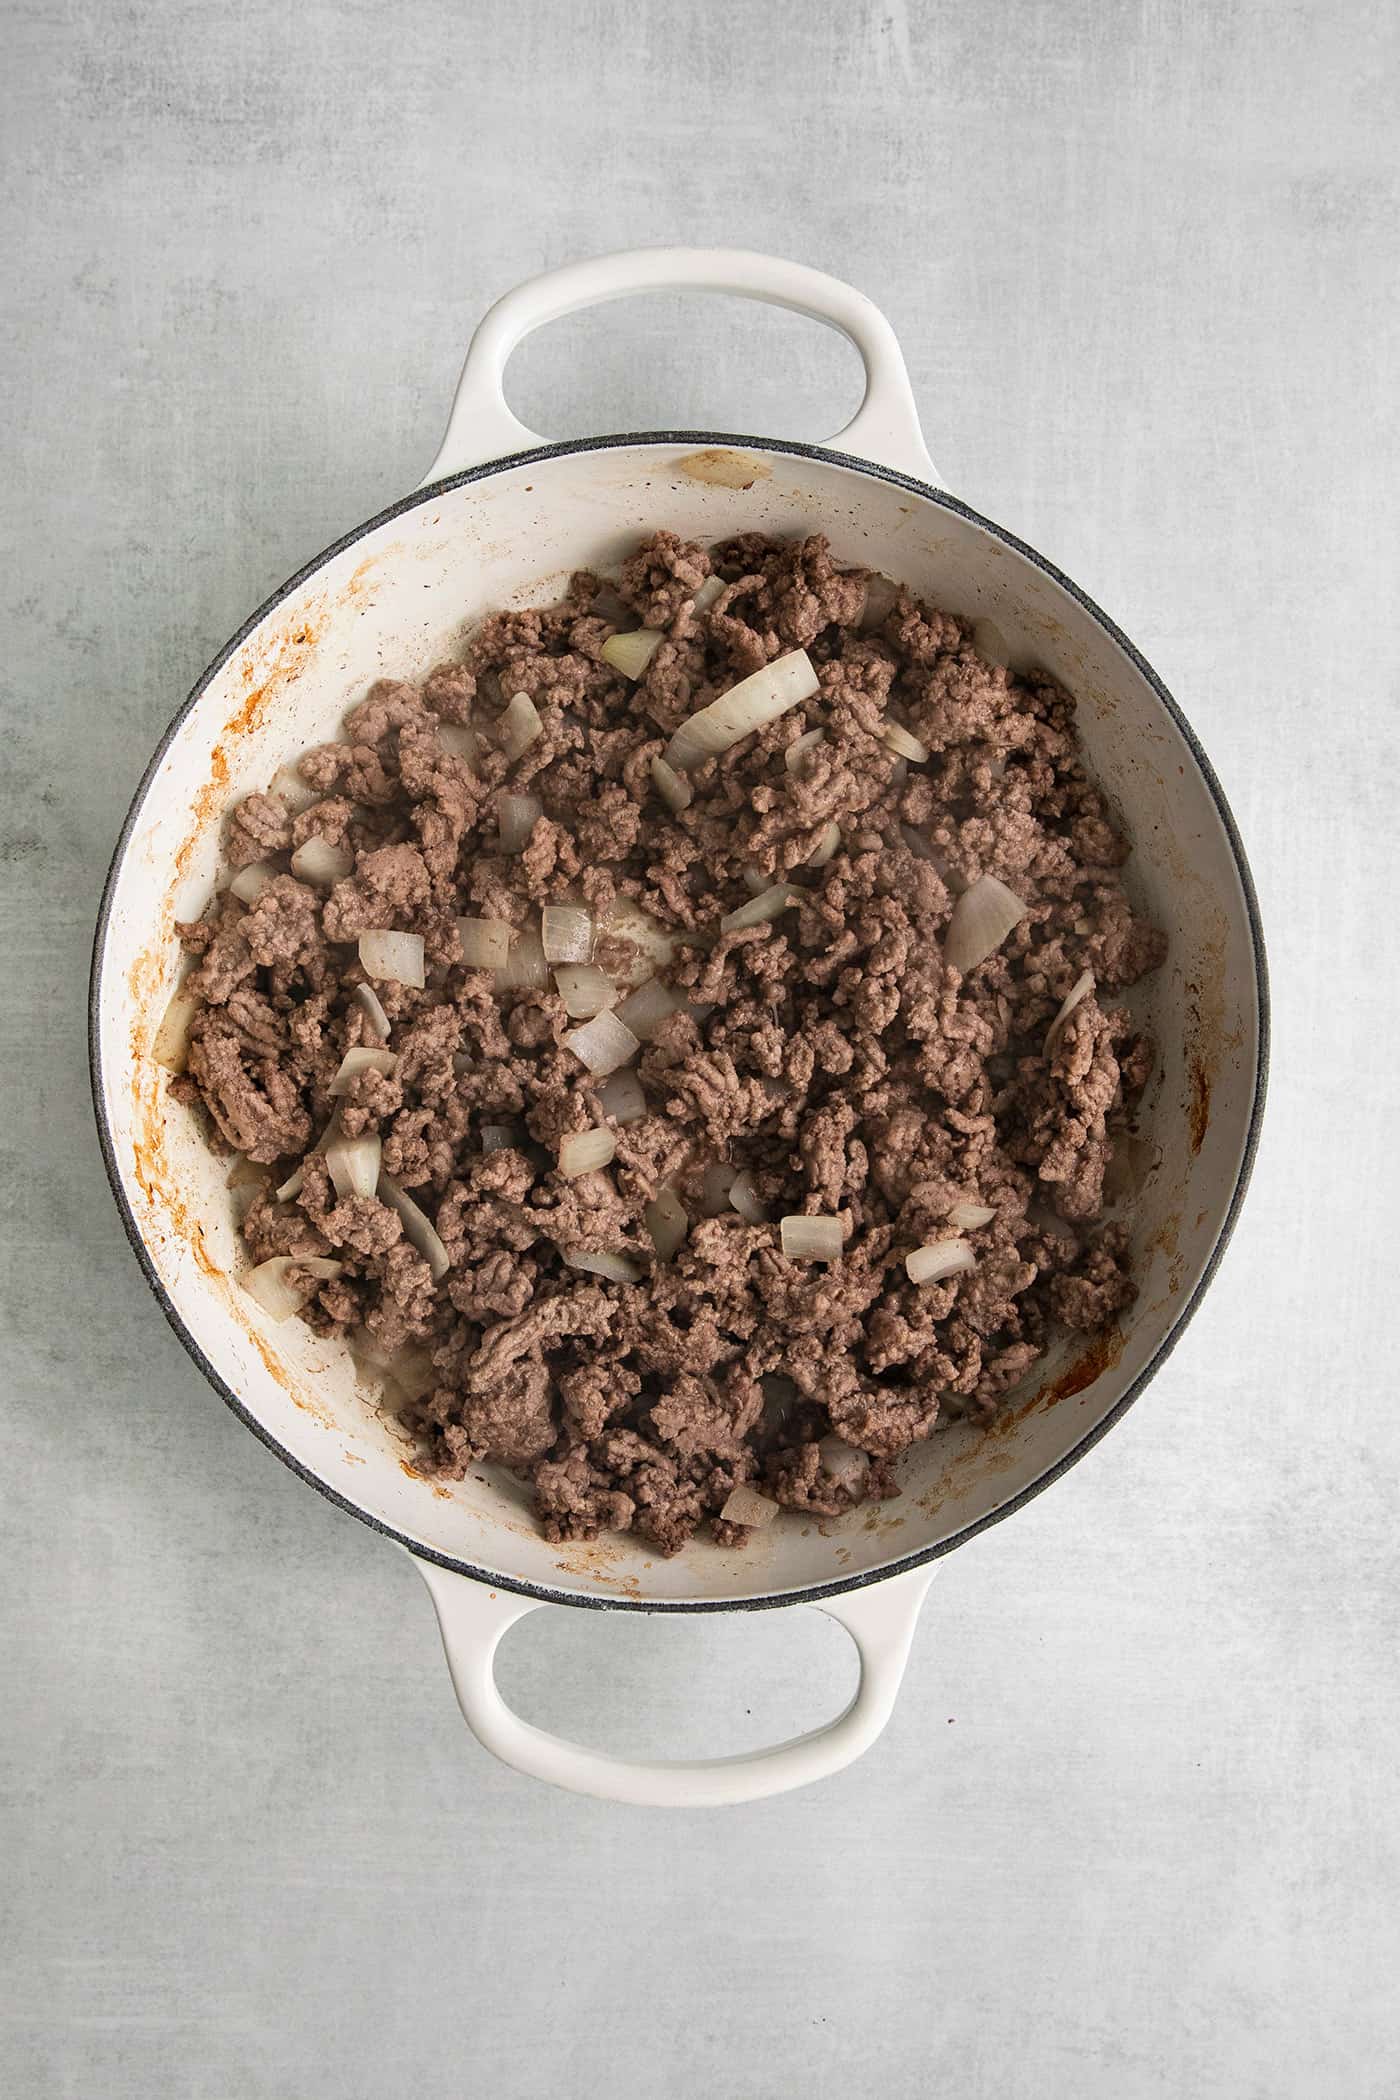 Cooked ground beef in a skillet